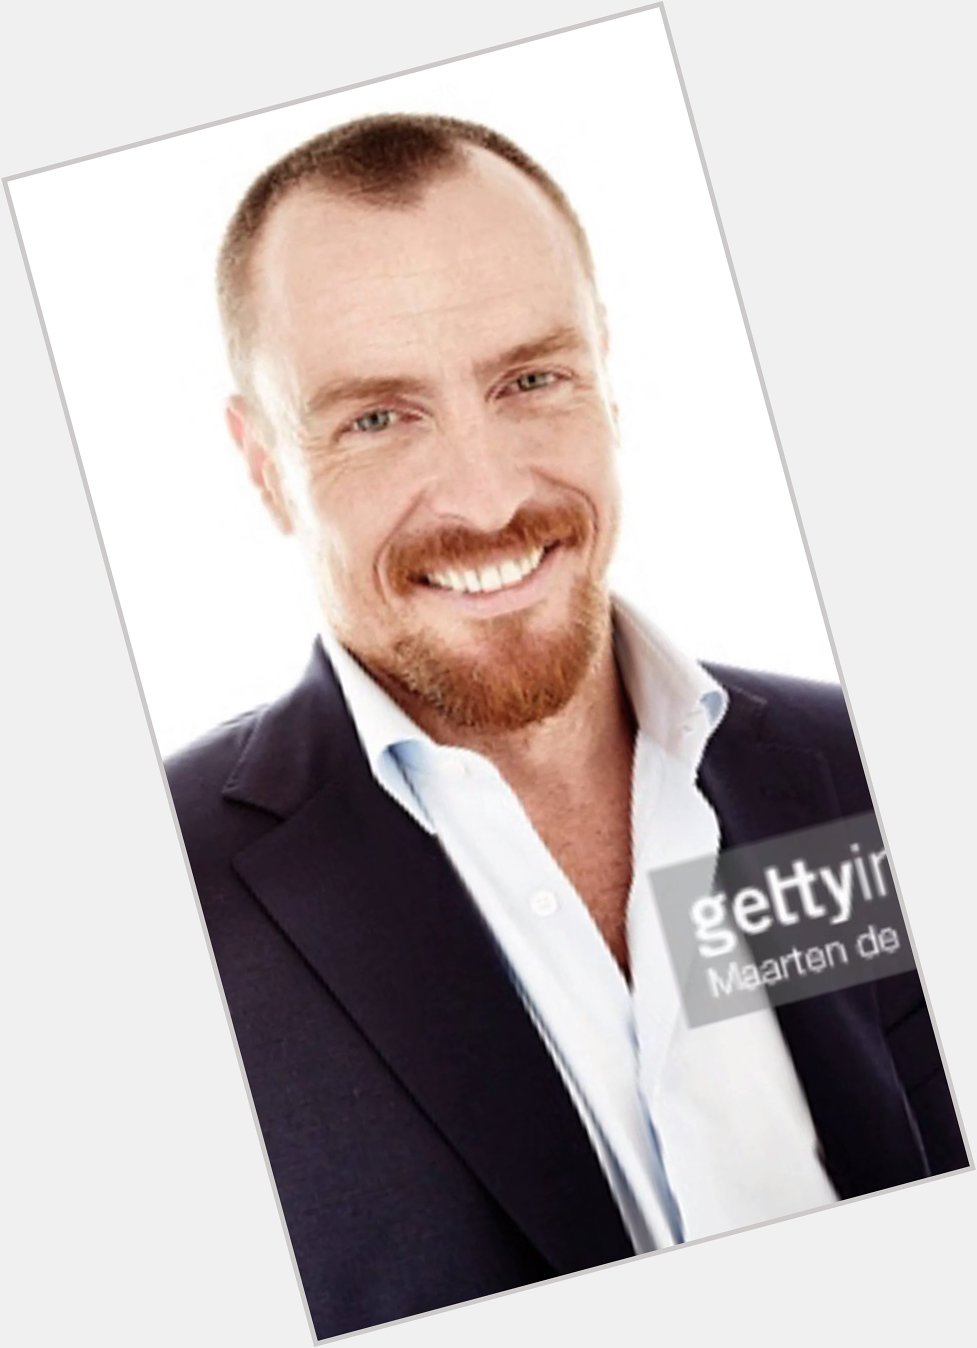 Toby Stephens was Born on this day 21 April 1969, happy birthday Toby have a fabulous day! Xx 